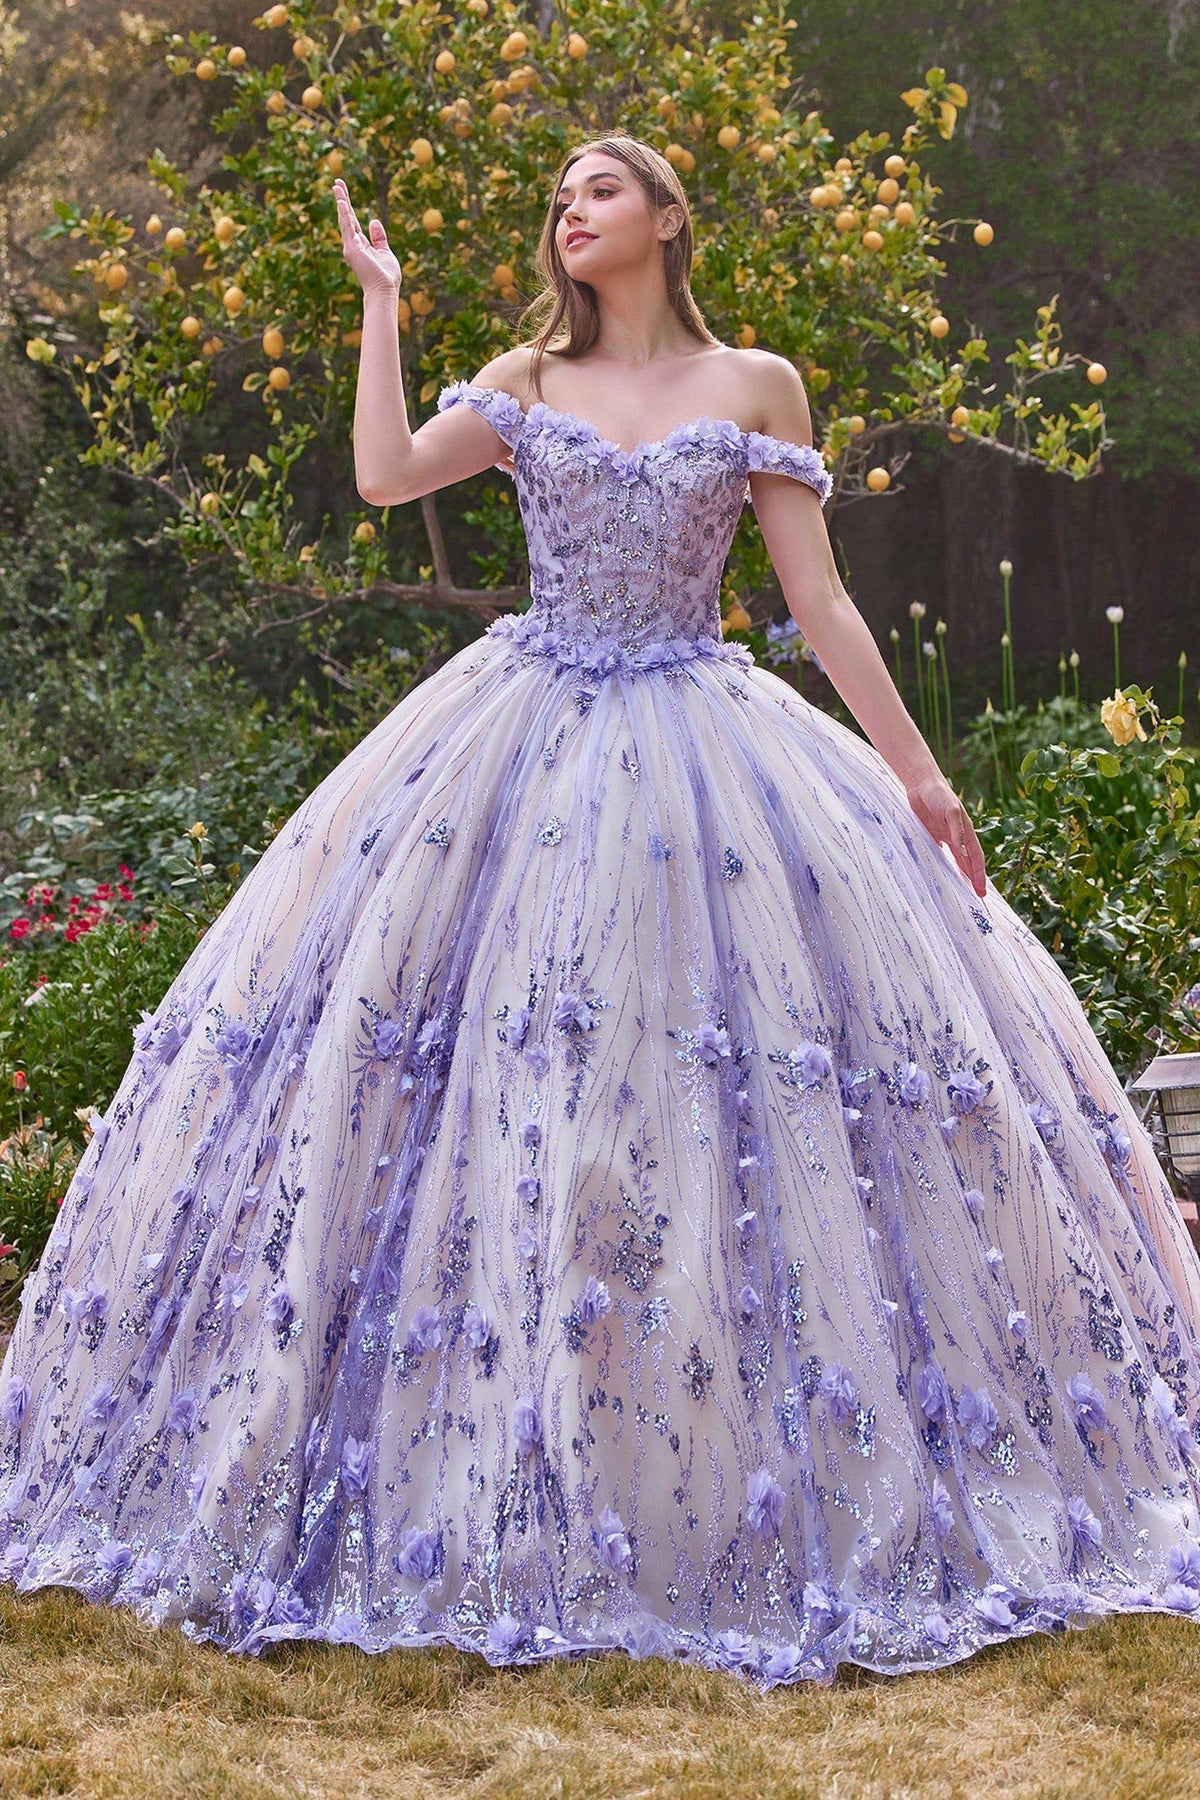 The #1 Quinceanera Dresses  Princess Gown - Buy the Perfect Quince Dress  for your Coming of Age, Shop Online for Amazing Quinceanera Gowns of Every  Color, with Sleeves or Sleeveless